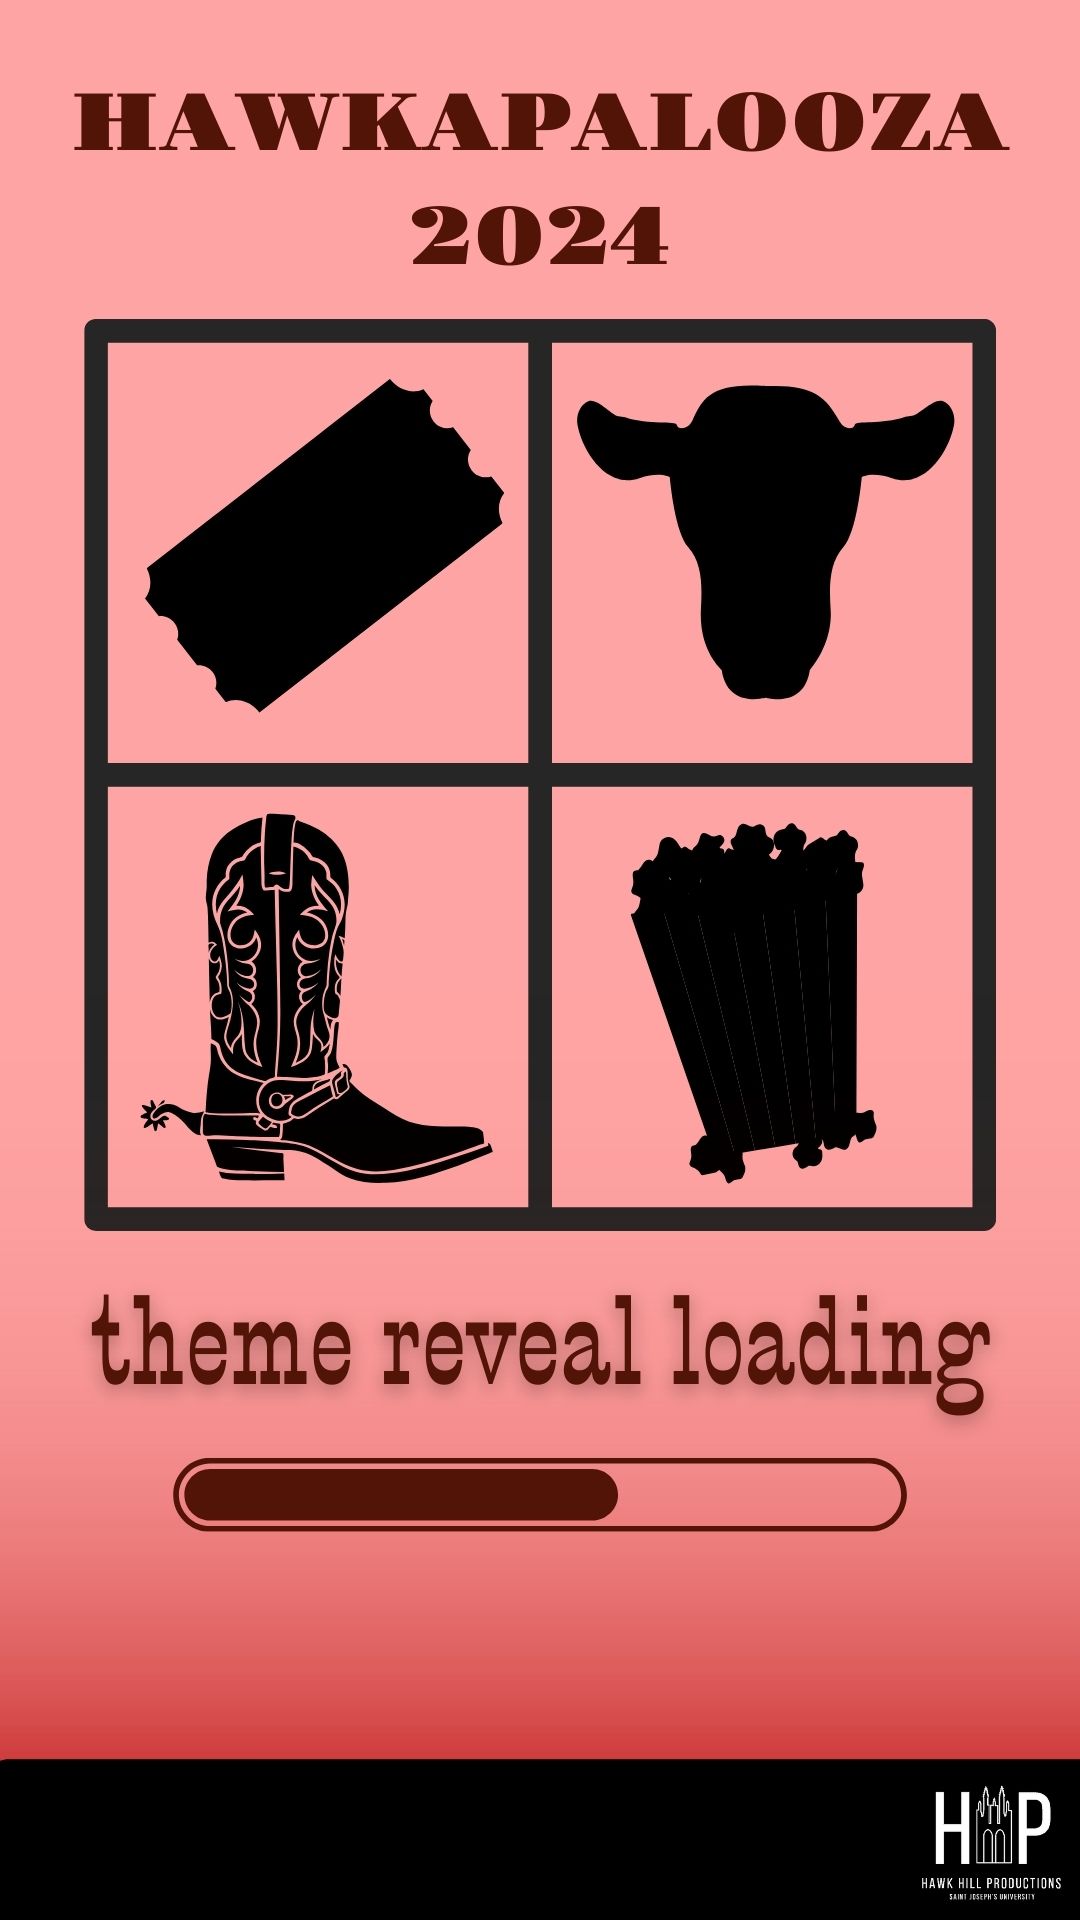 This is an instagram story with a light red background with a large heading at the top that says 'Hawkapalooza 2024'. The image has a grid in the middle with four icons in the seperate quadrants of the grid. The icons include a bull head, a popcorn bucket, a carnival ticket and a cowboy boot. Underneath the grid there is a caption that says 'Theme Reveal Loading'.